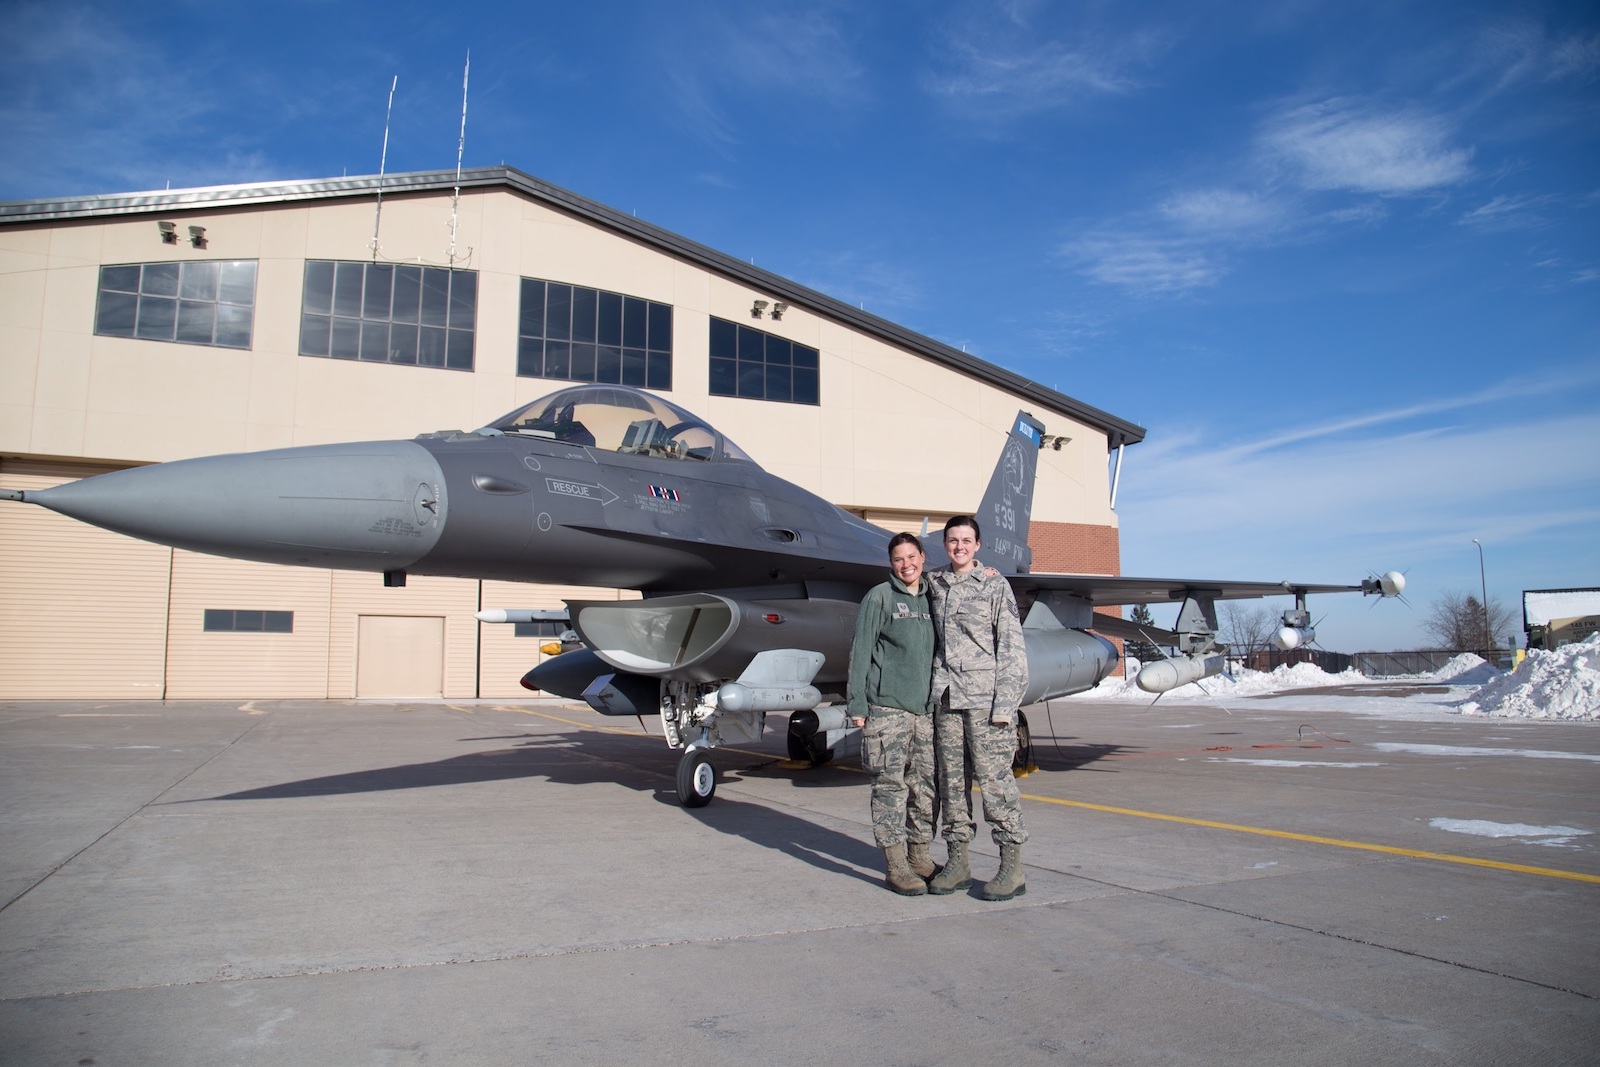 Two women in US Air Force Uniforms stand in front of an F-16 fighter jet